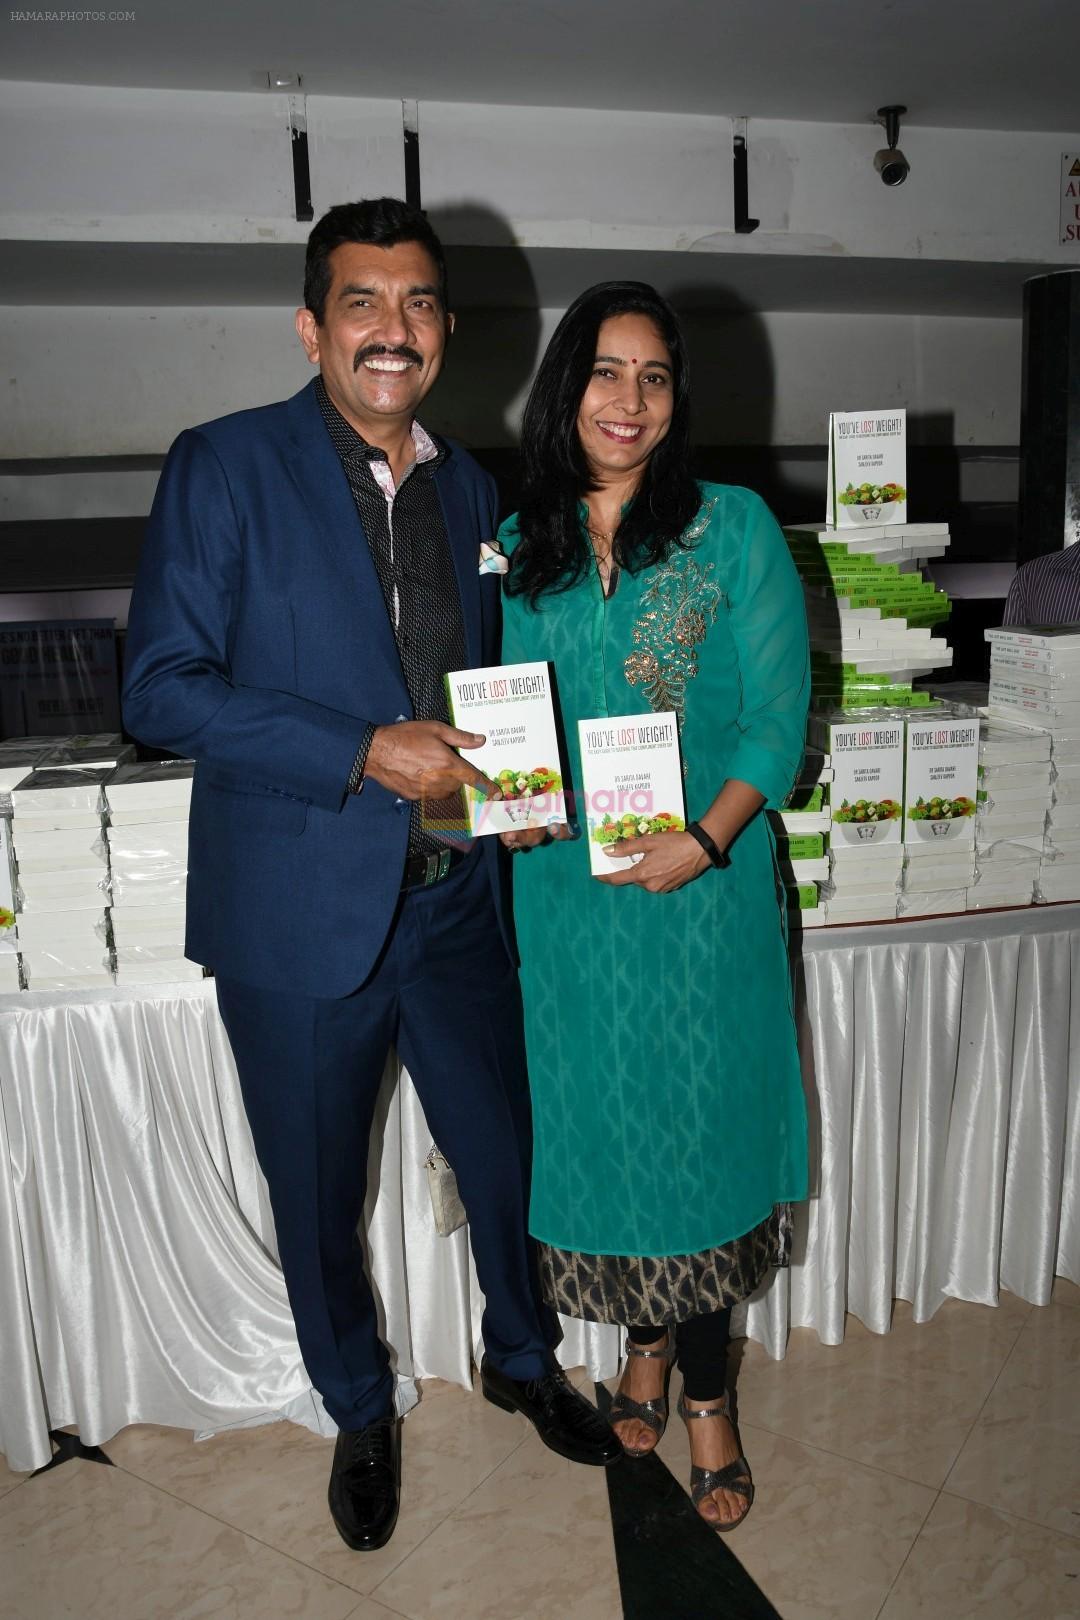 Sanjeev Kapoor At The Book Launch Of YOU_VE LOST WEIGHT on 12th Dec 2017